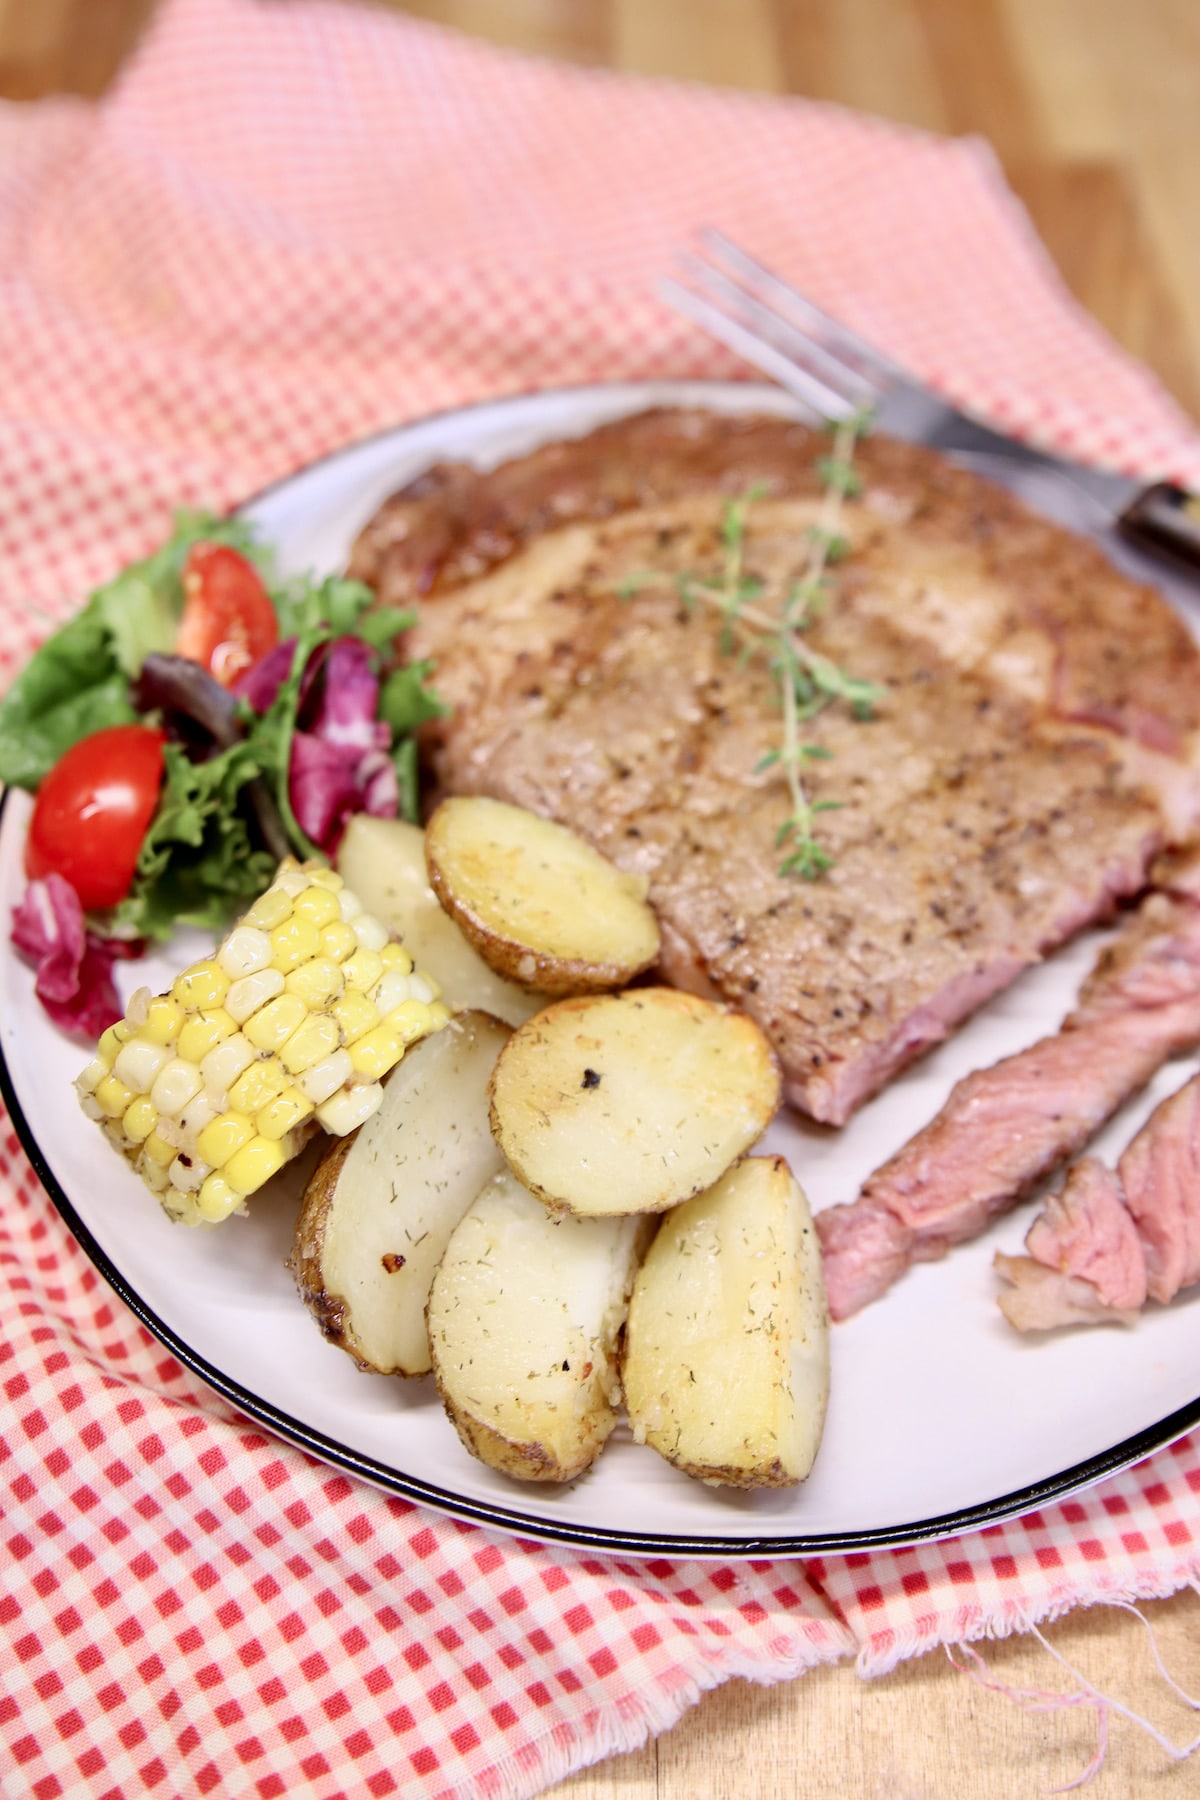 Steak, potatoes and corn on a plate.